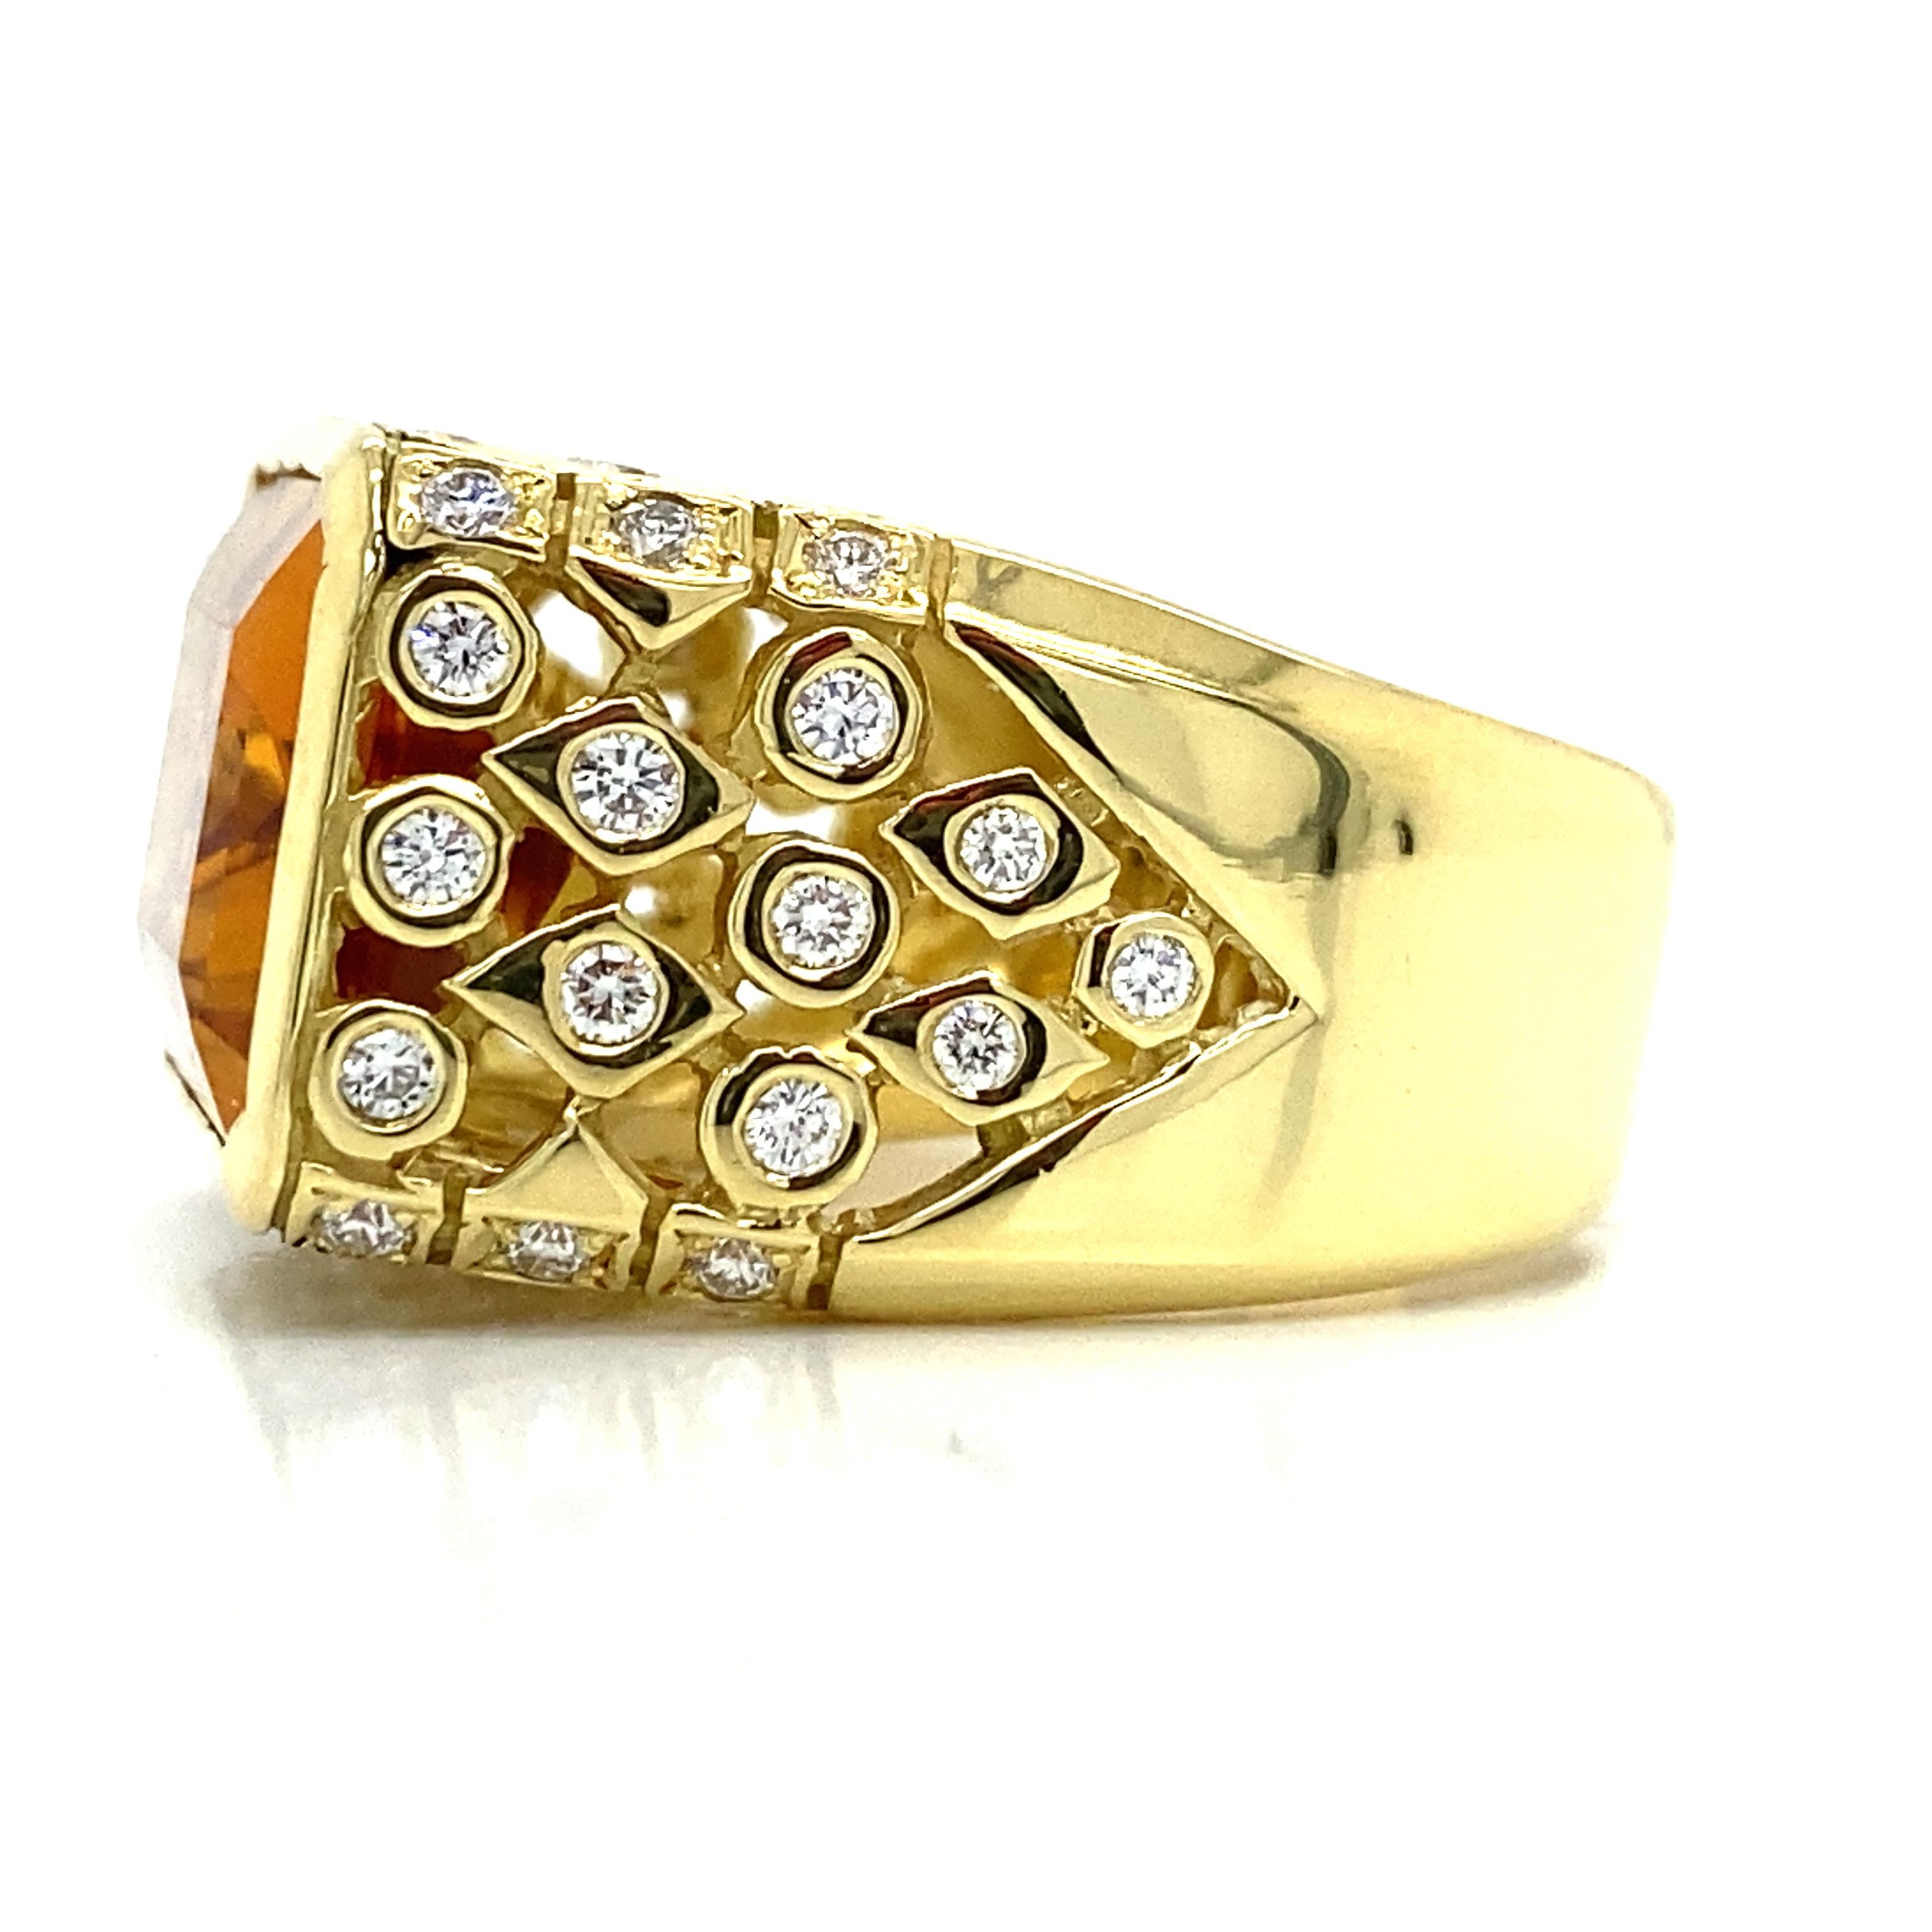 18k Seidengang Topaz Diamond Signet Ring Yellow Gold In Good Condition For Sale In Boca Raton, FL